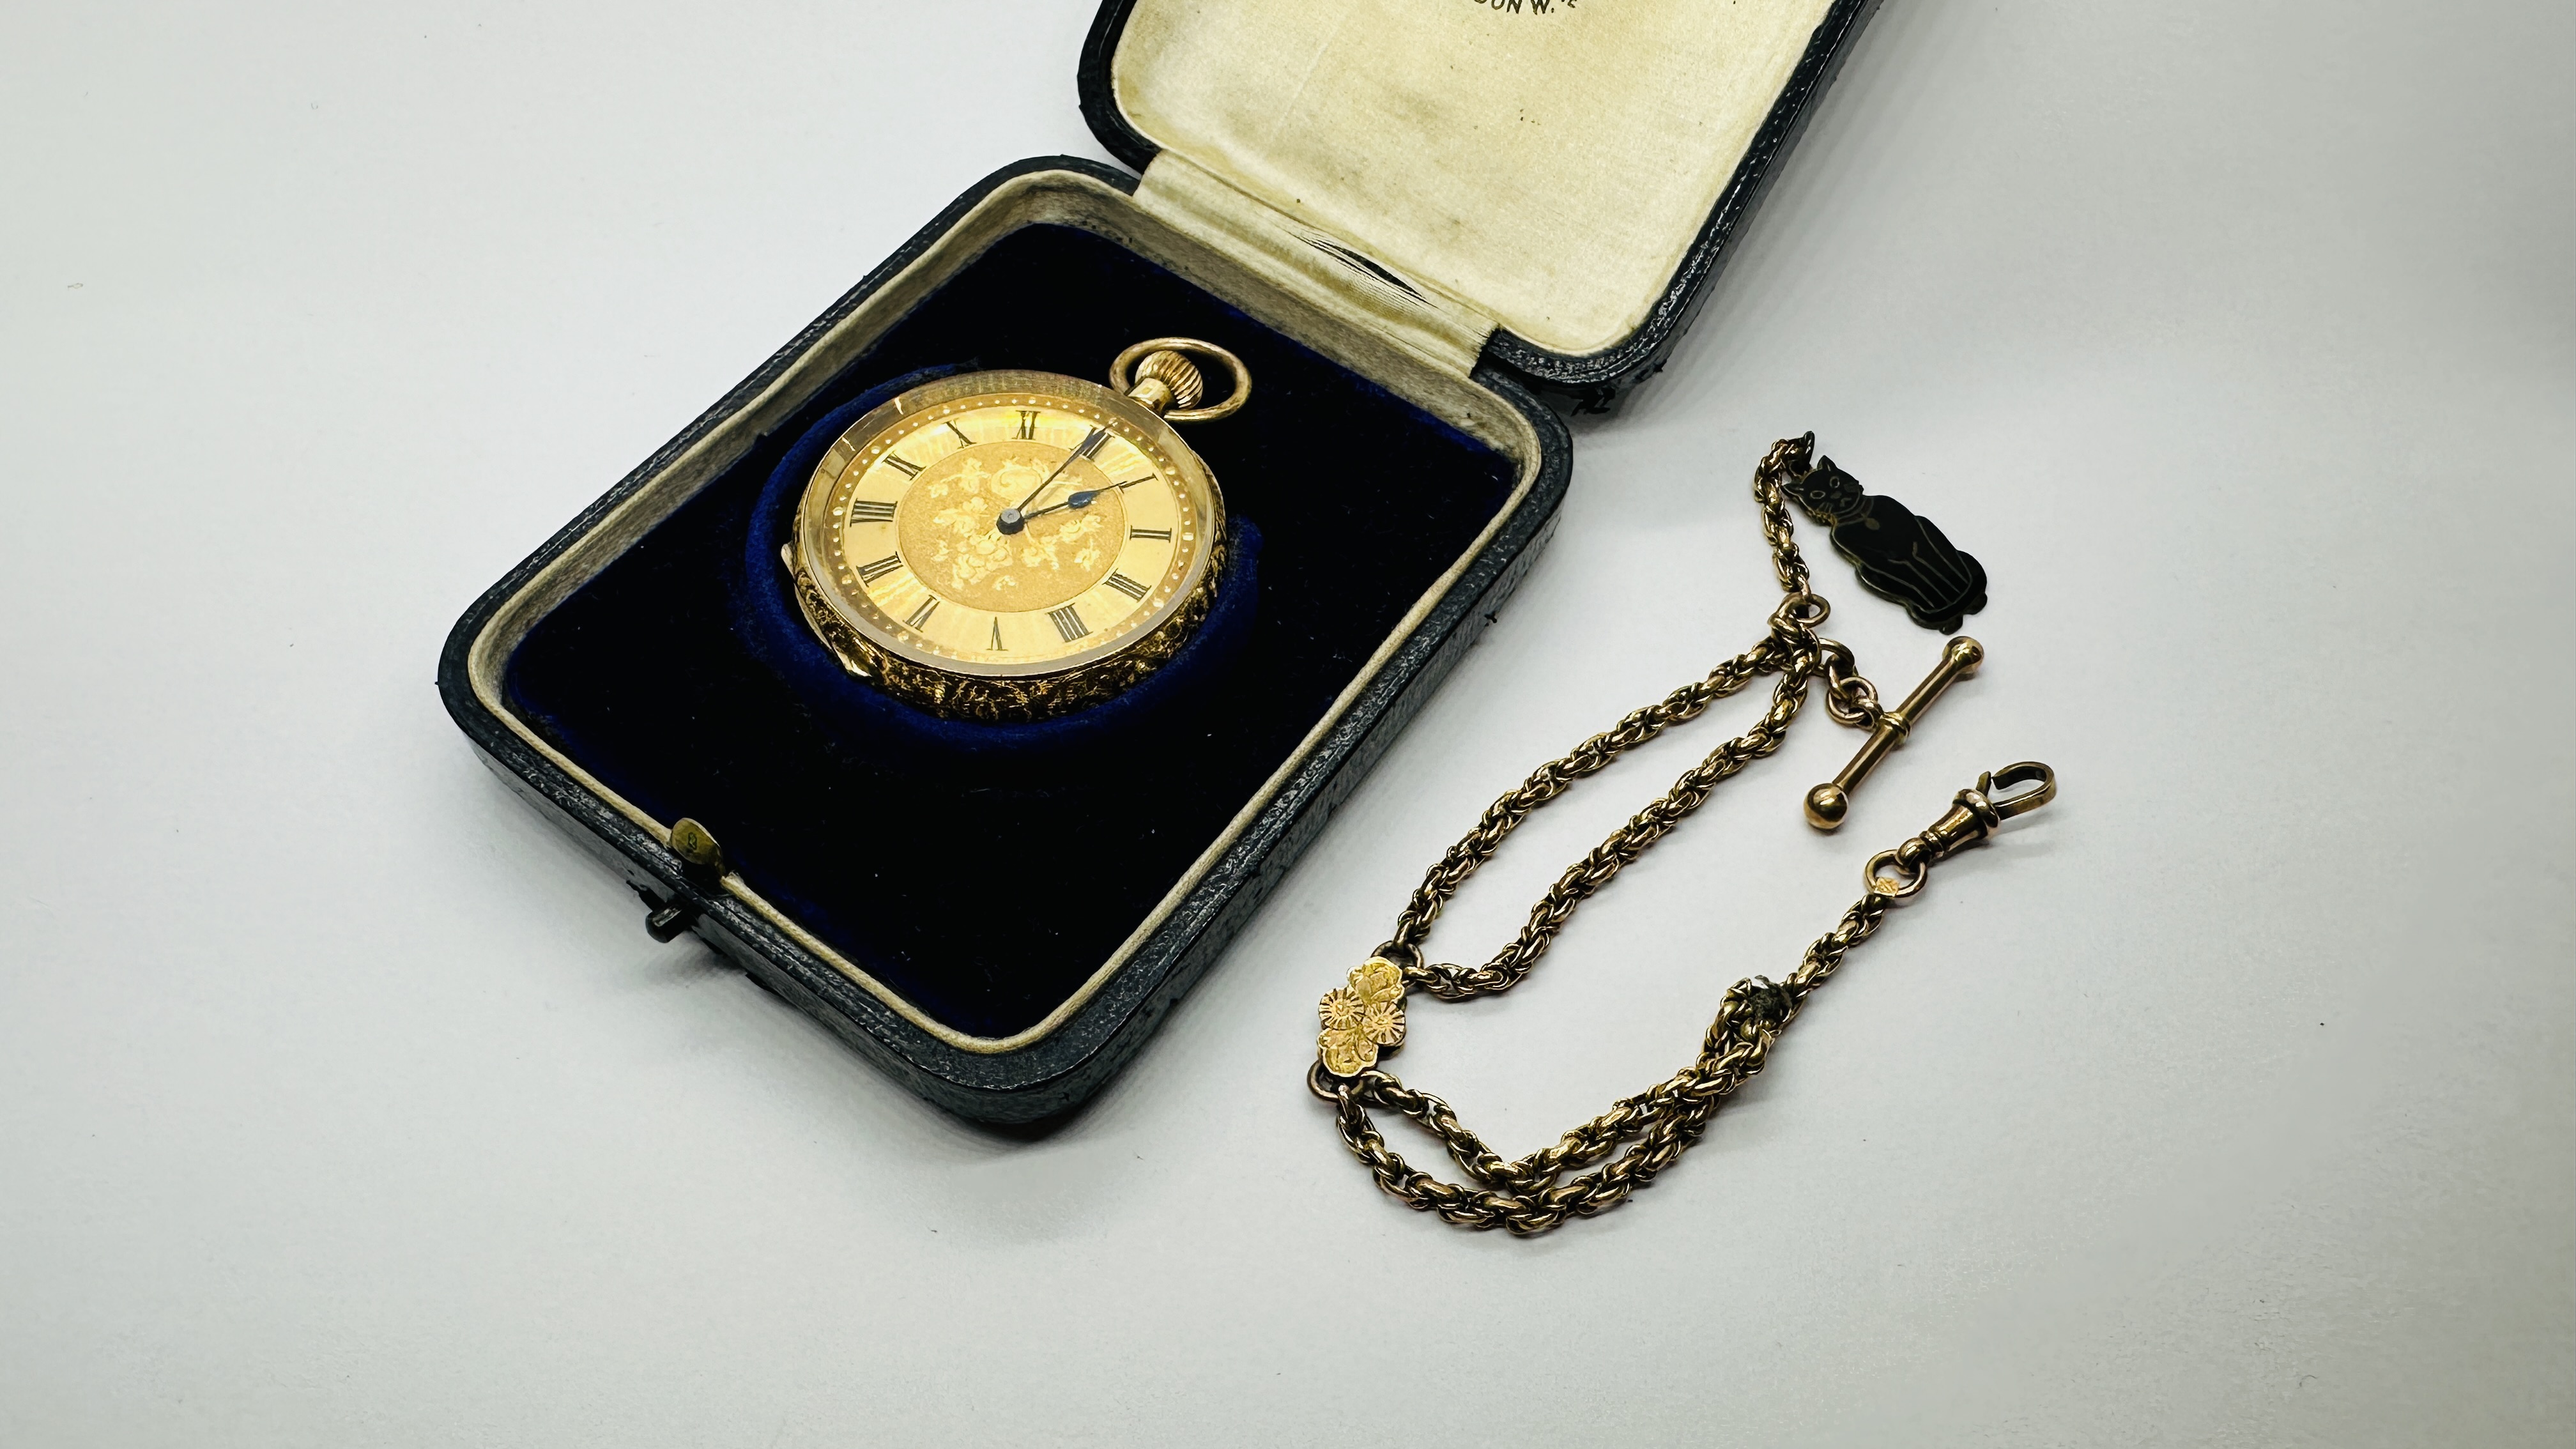 AN ELABORATE ANTIQUE 18CT GOLD CASED HALF HUNTER POCKET WATCH ALONG WITH A WOVEN WATCH CHAIN,